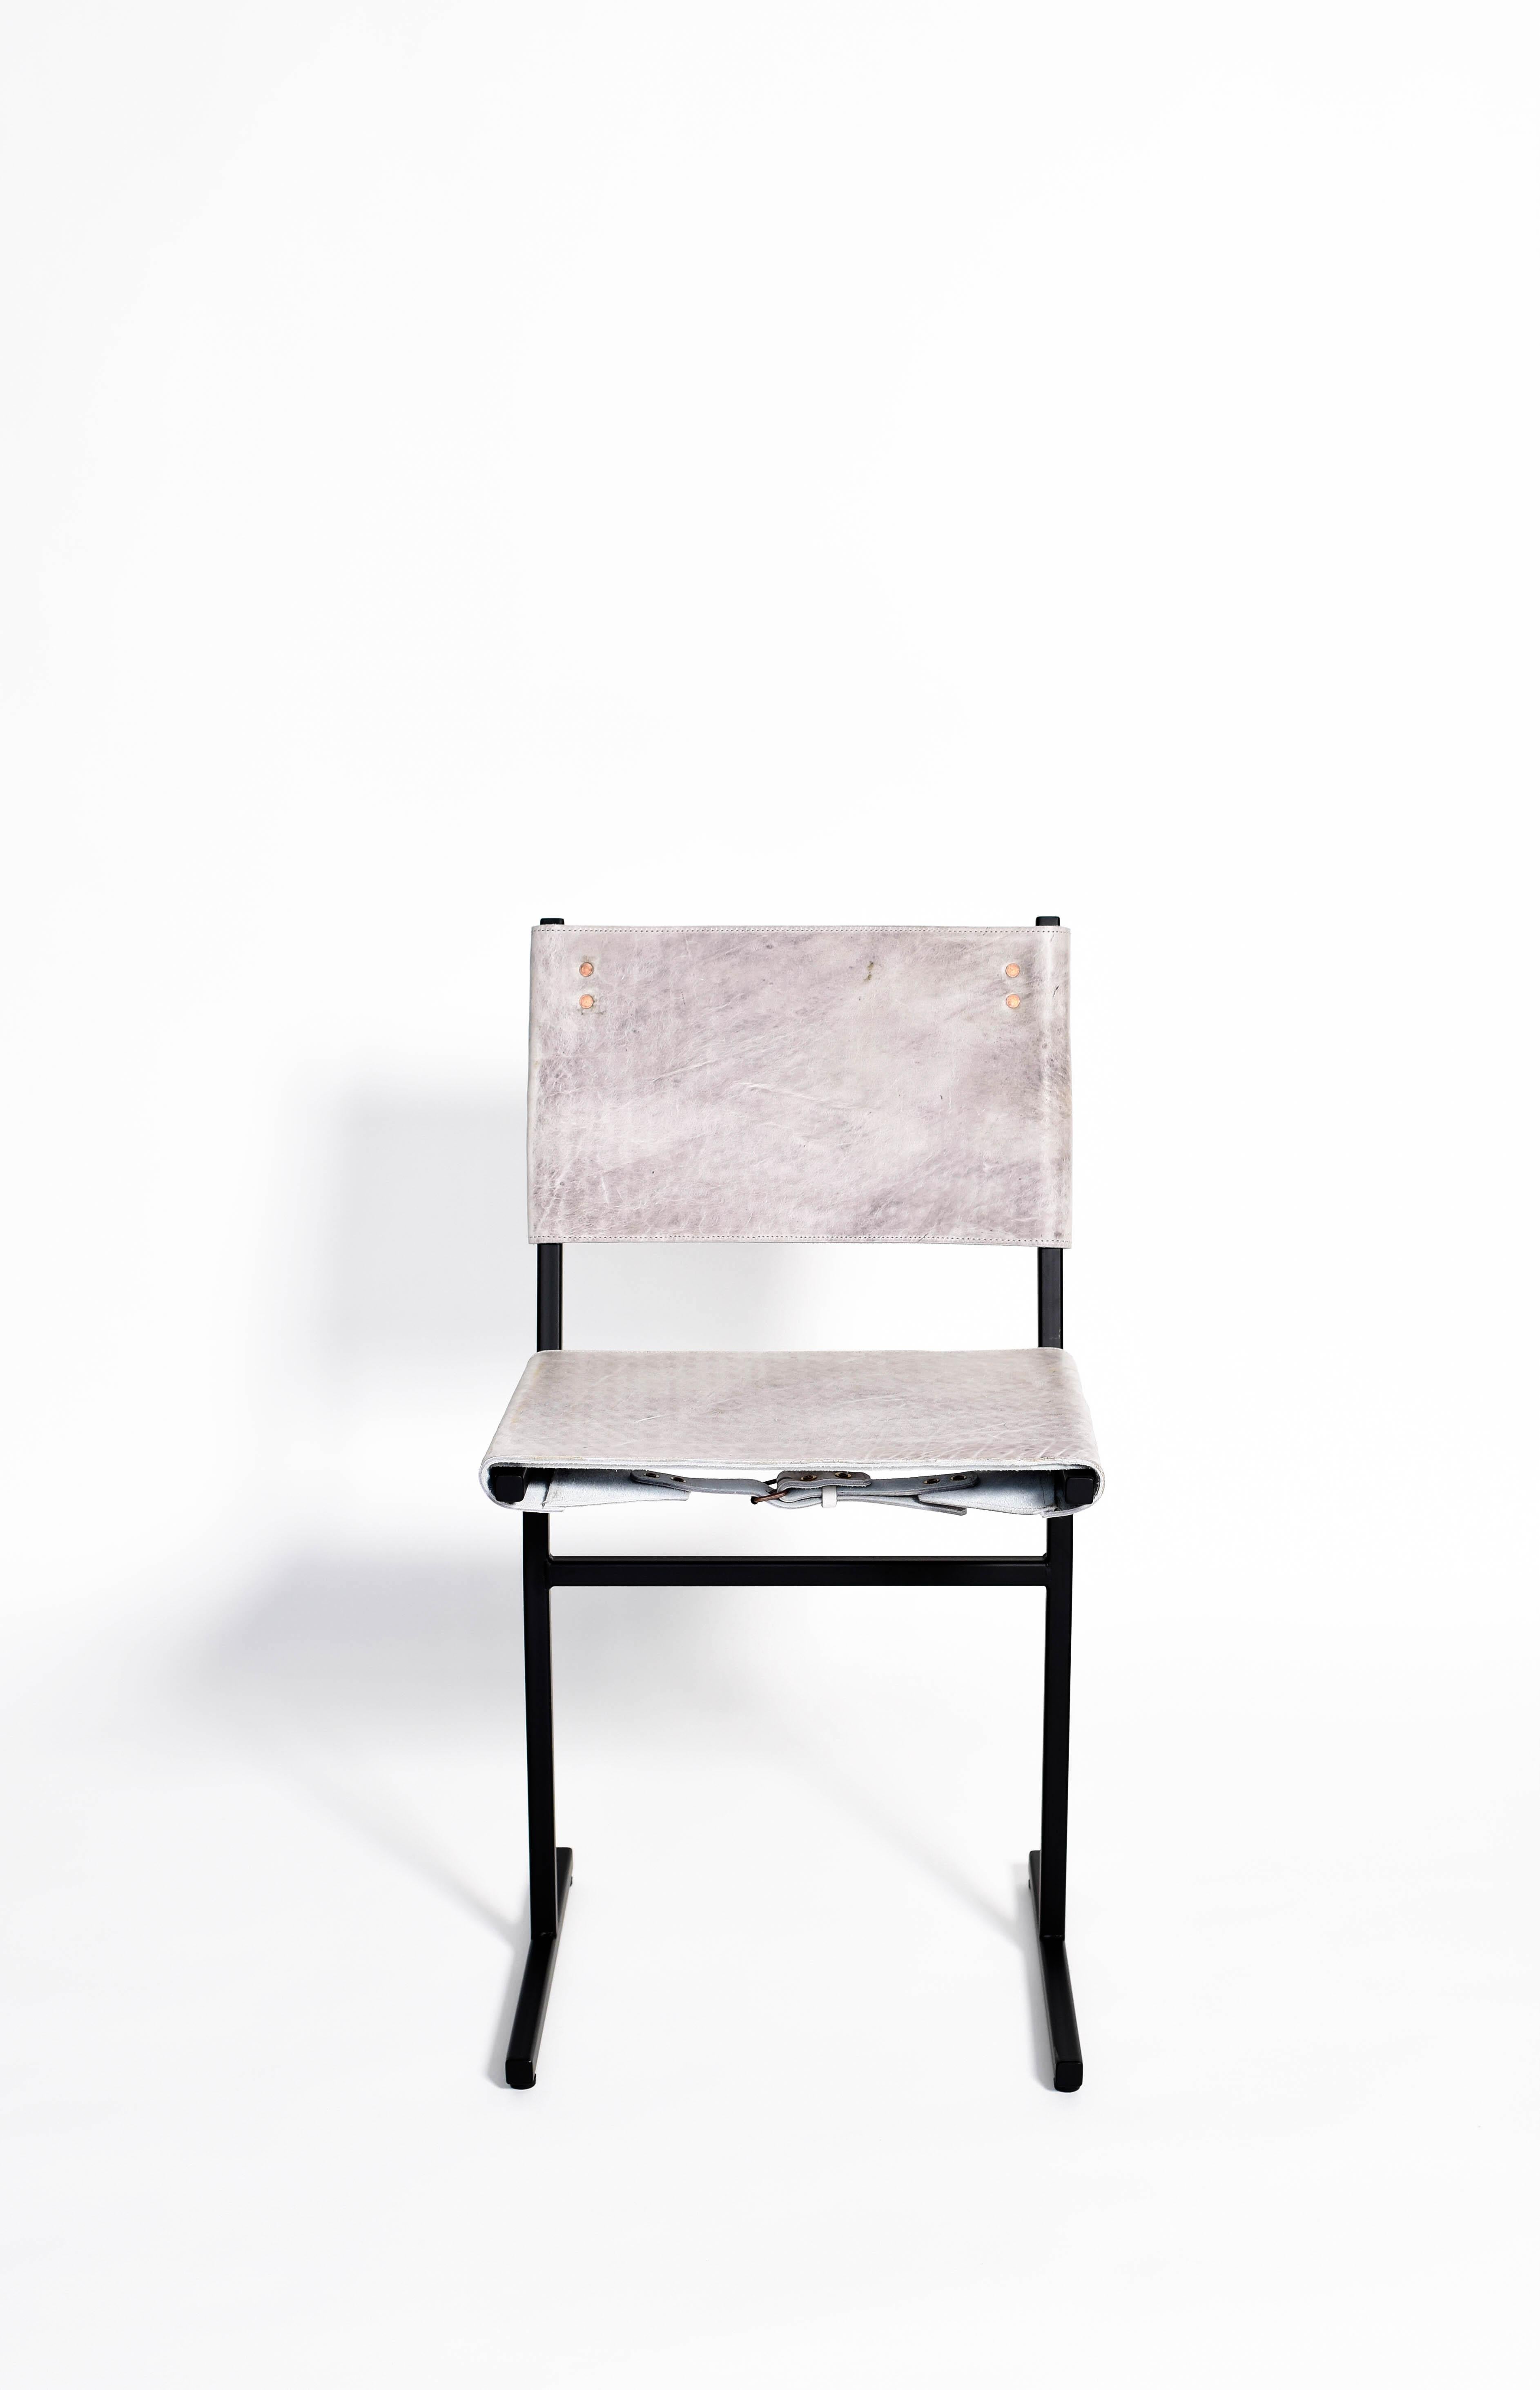 Contemporary Grey and Brass Memento Chair, Jesse Sanderson